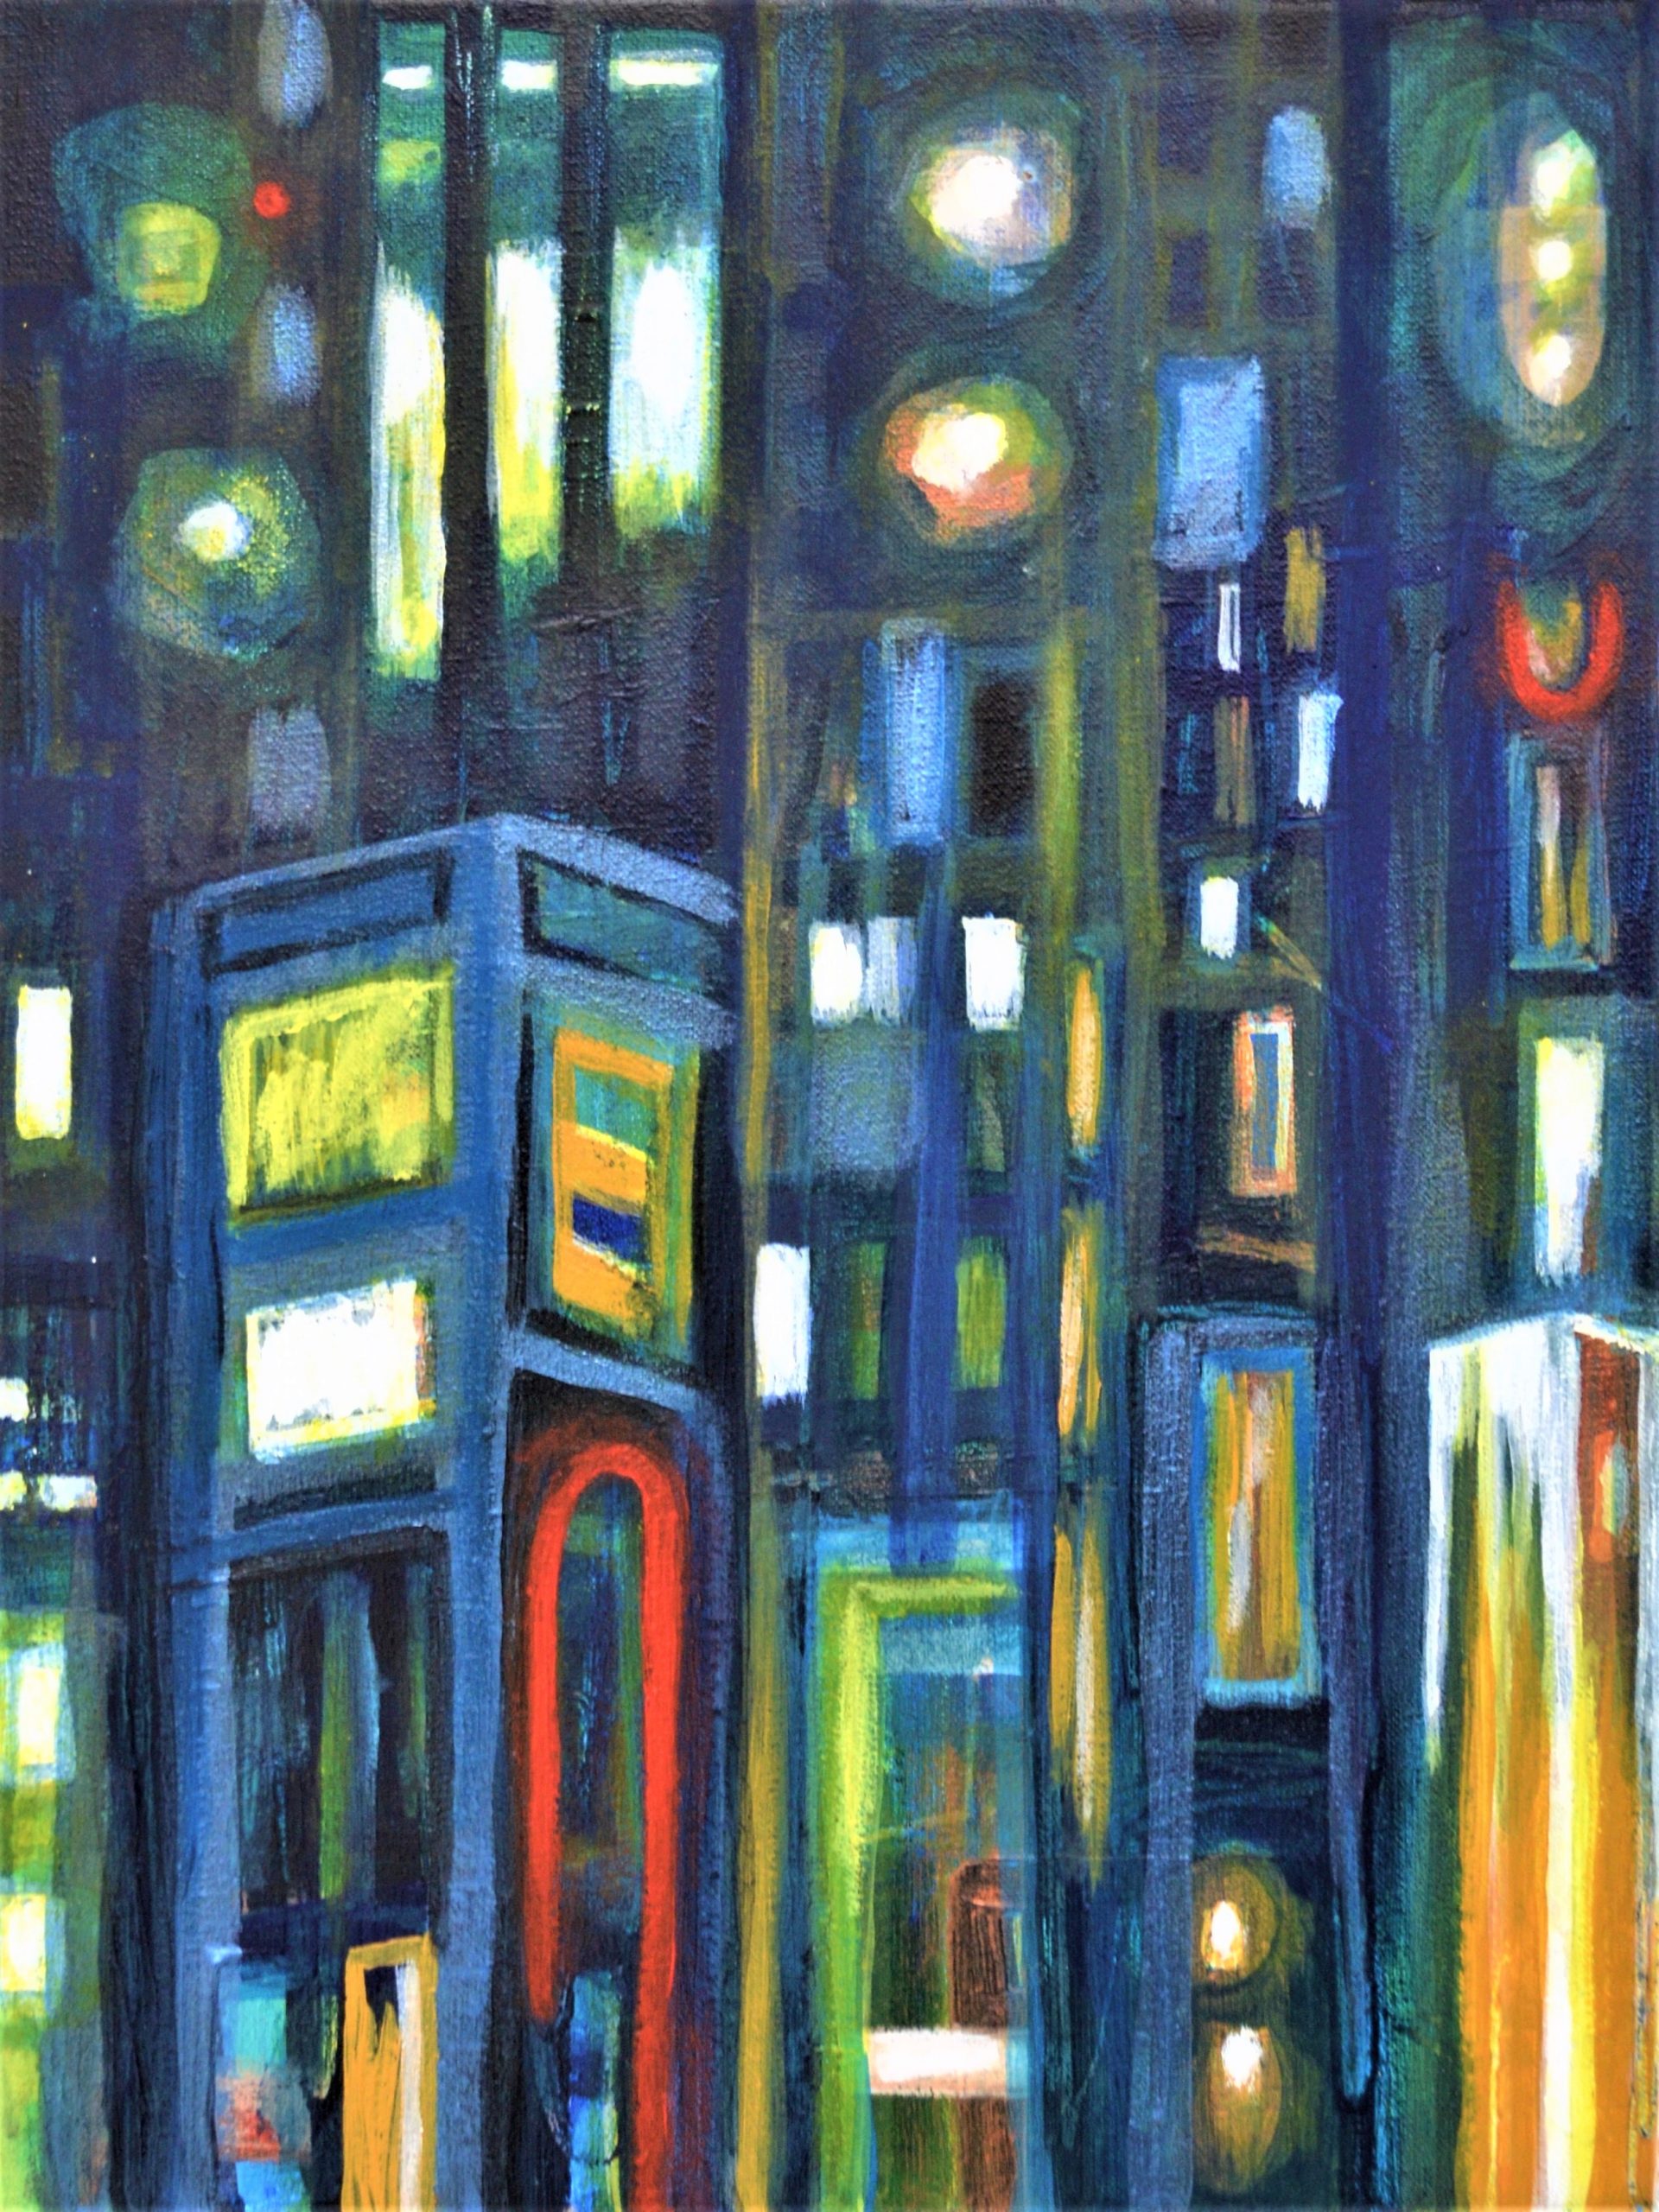 L-Tuziasm On a jazzy city trip fine art giclee print numbered and signed kunst citytrippin Utrecht2021